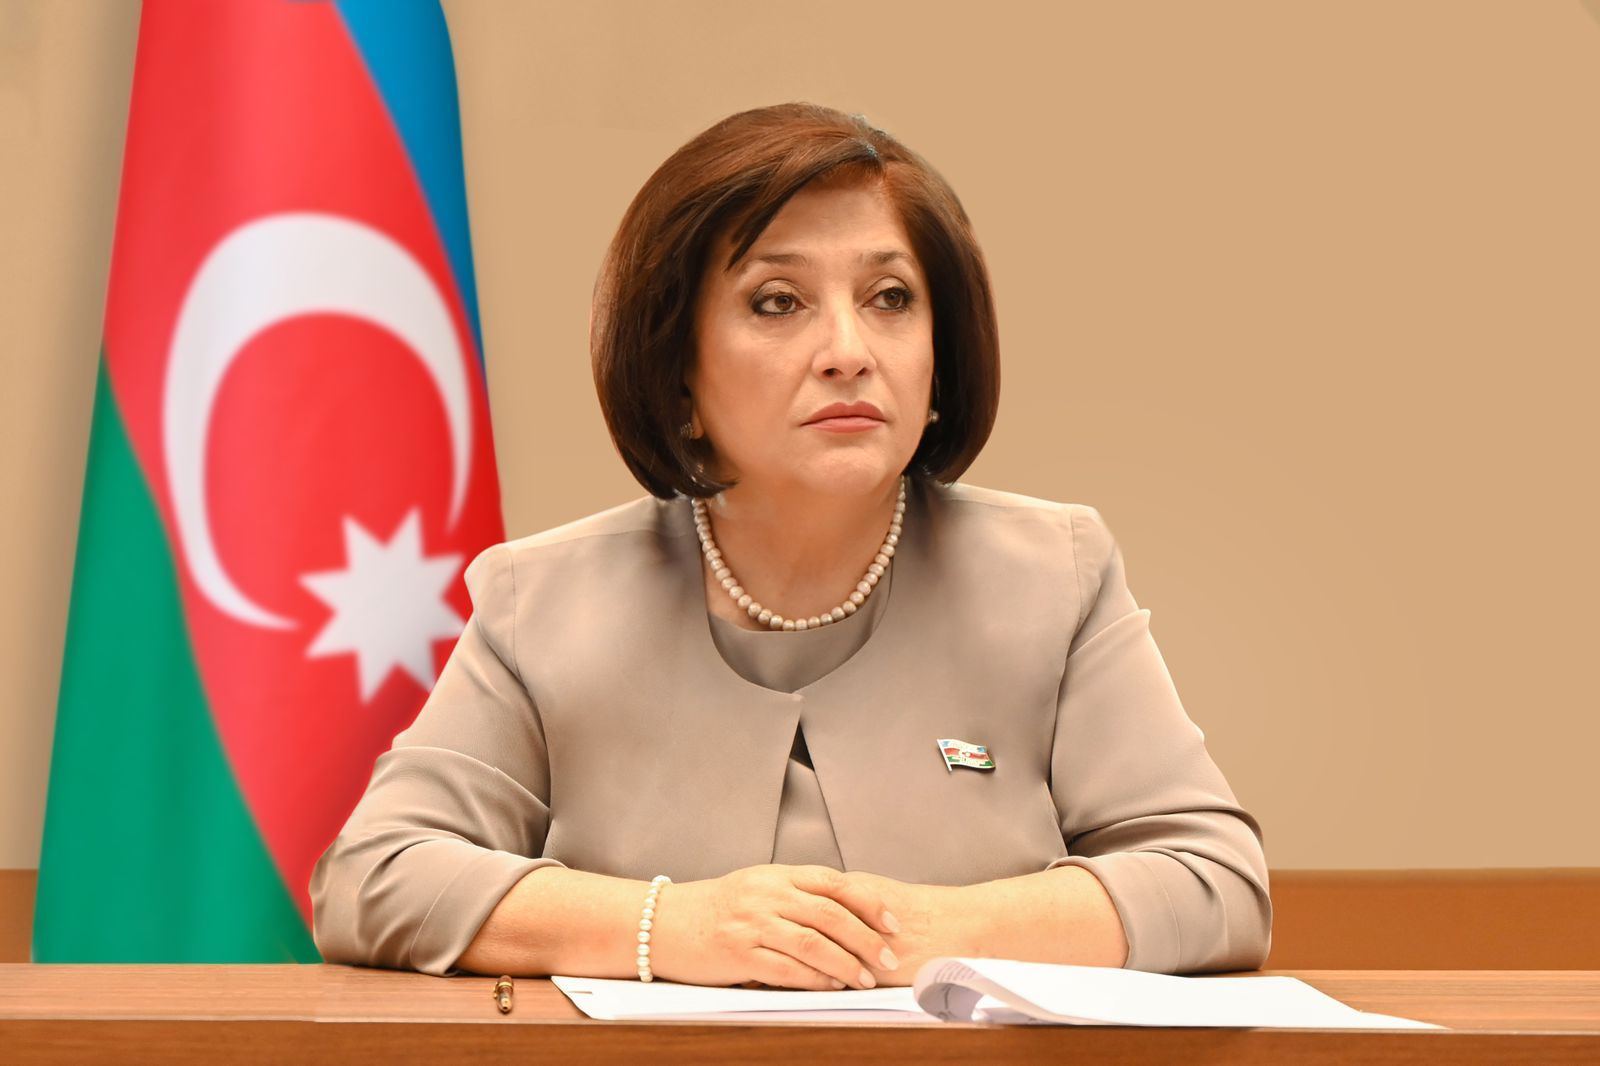 Creative work in all spheres took widespread after Heydar Aliyev came to power - Chair of Azerbaijani Parliament